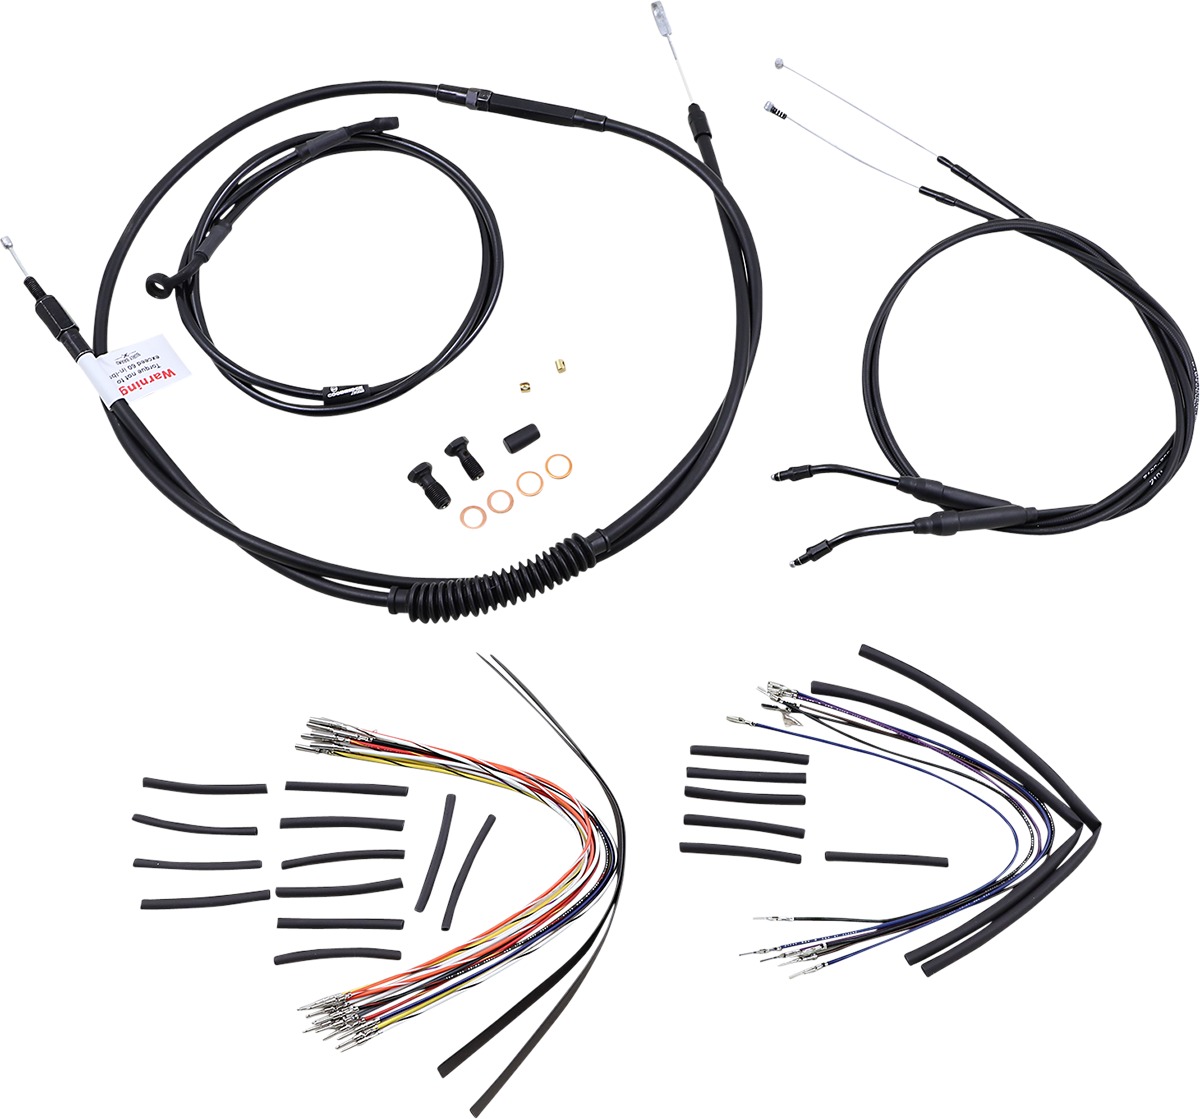 Extended Black Control Cable Kit - 14" tall bars - 2006 HD Dyna - Click Image to Close